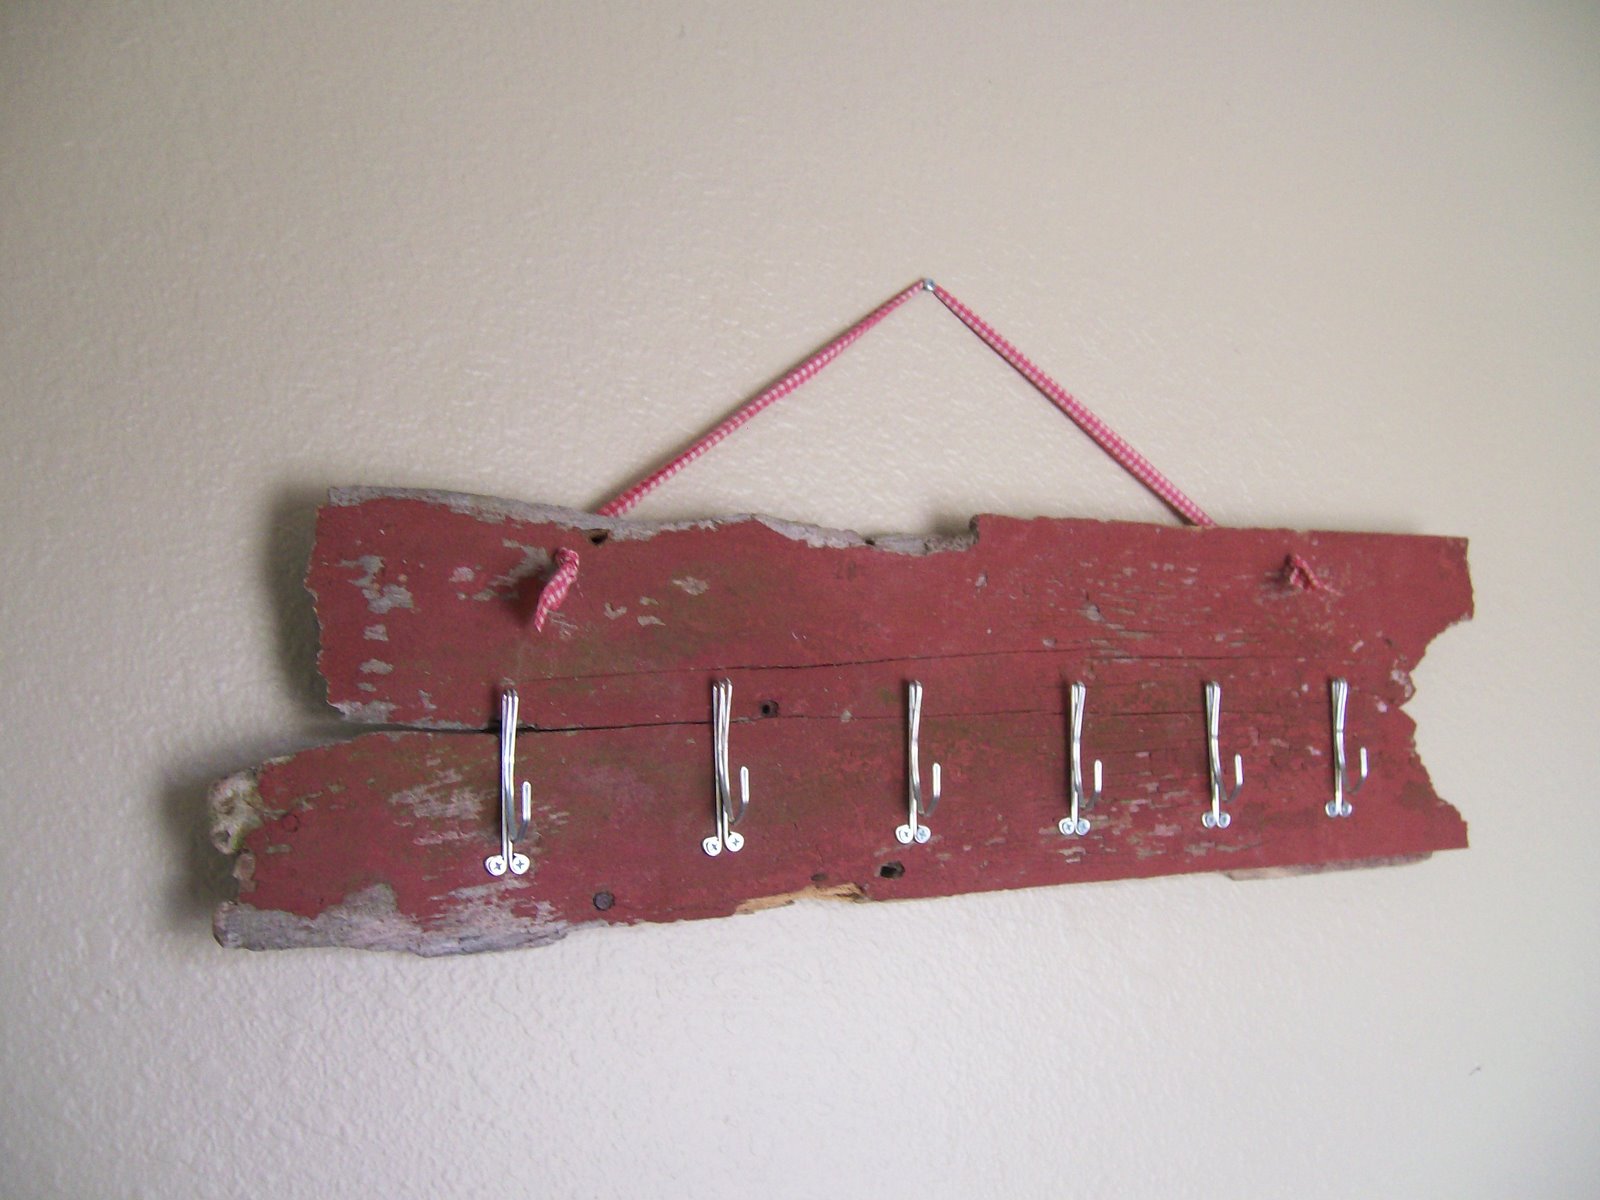 Recycle old barn wood (or any other scrap wood), along with scrap 